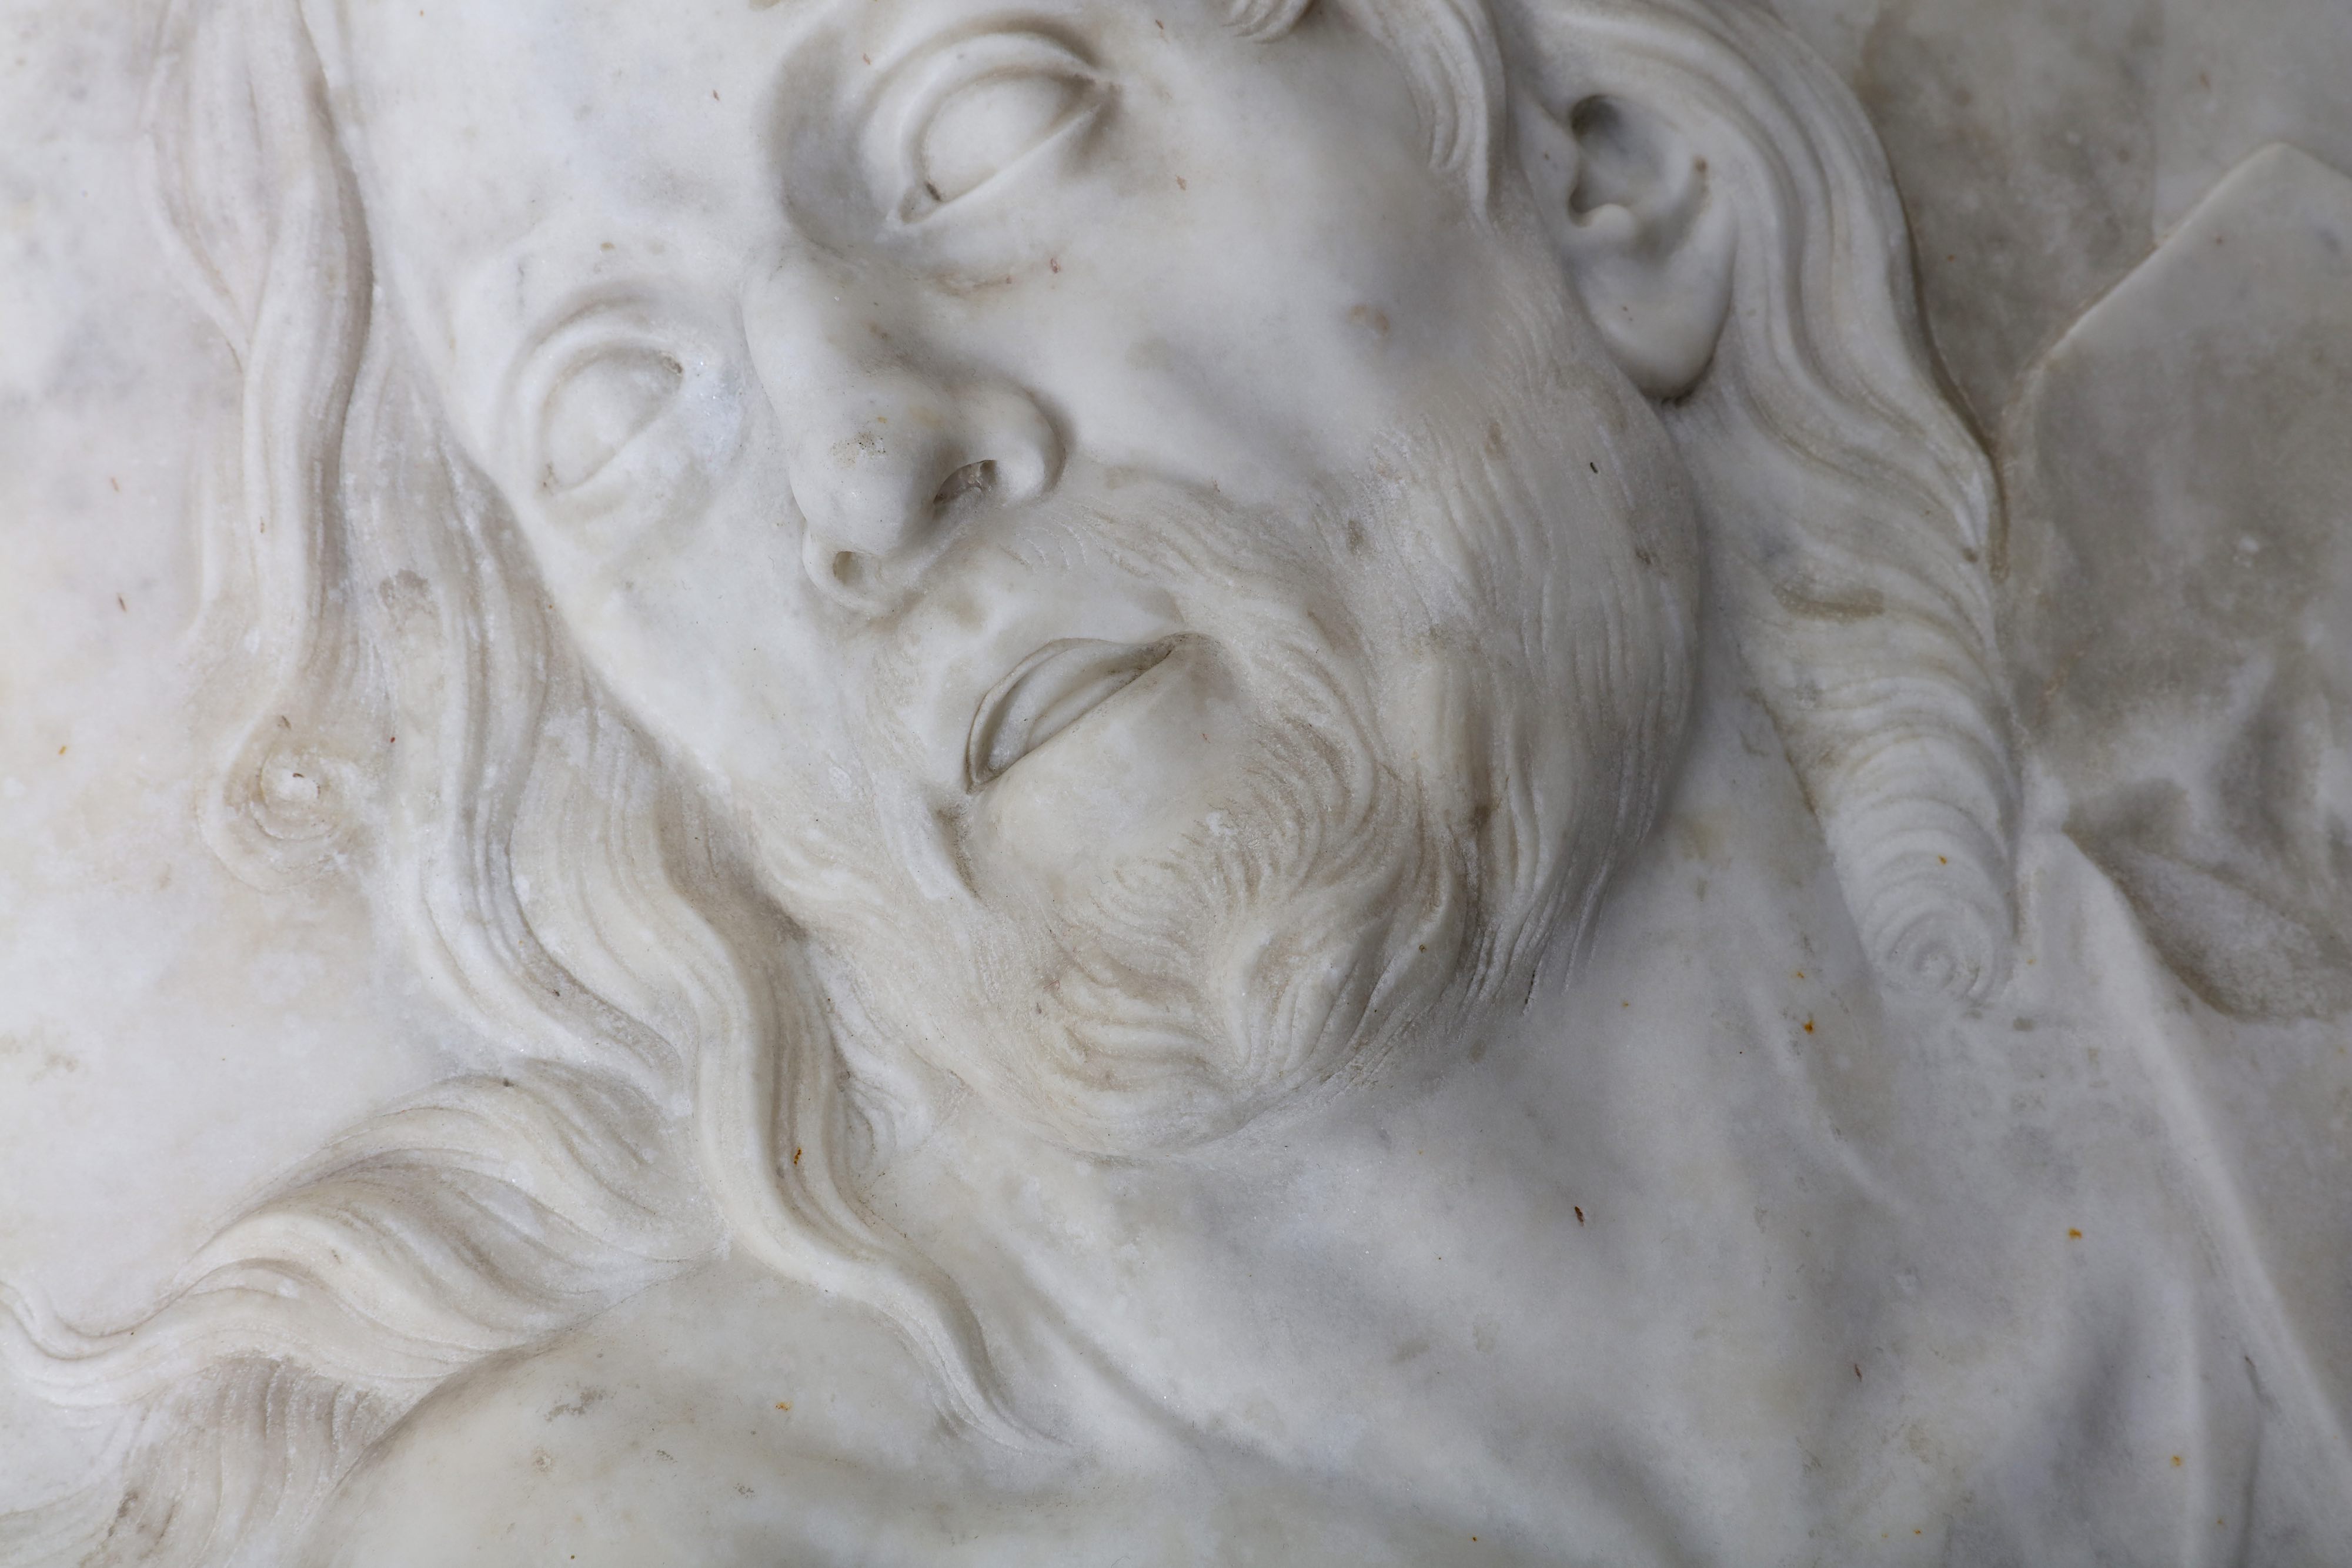 A PAIR OF ITALIAN 18TH CENTURY MARBLE RELIEFS DEPICTING CHRIST AND THE MOURNING VIRGIN IN THE MANNER - Image 5 of 11